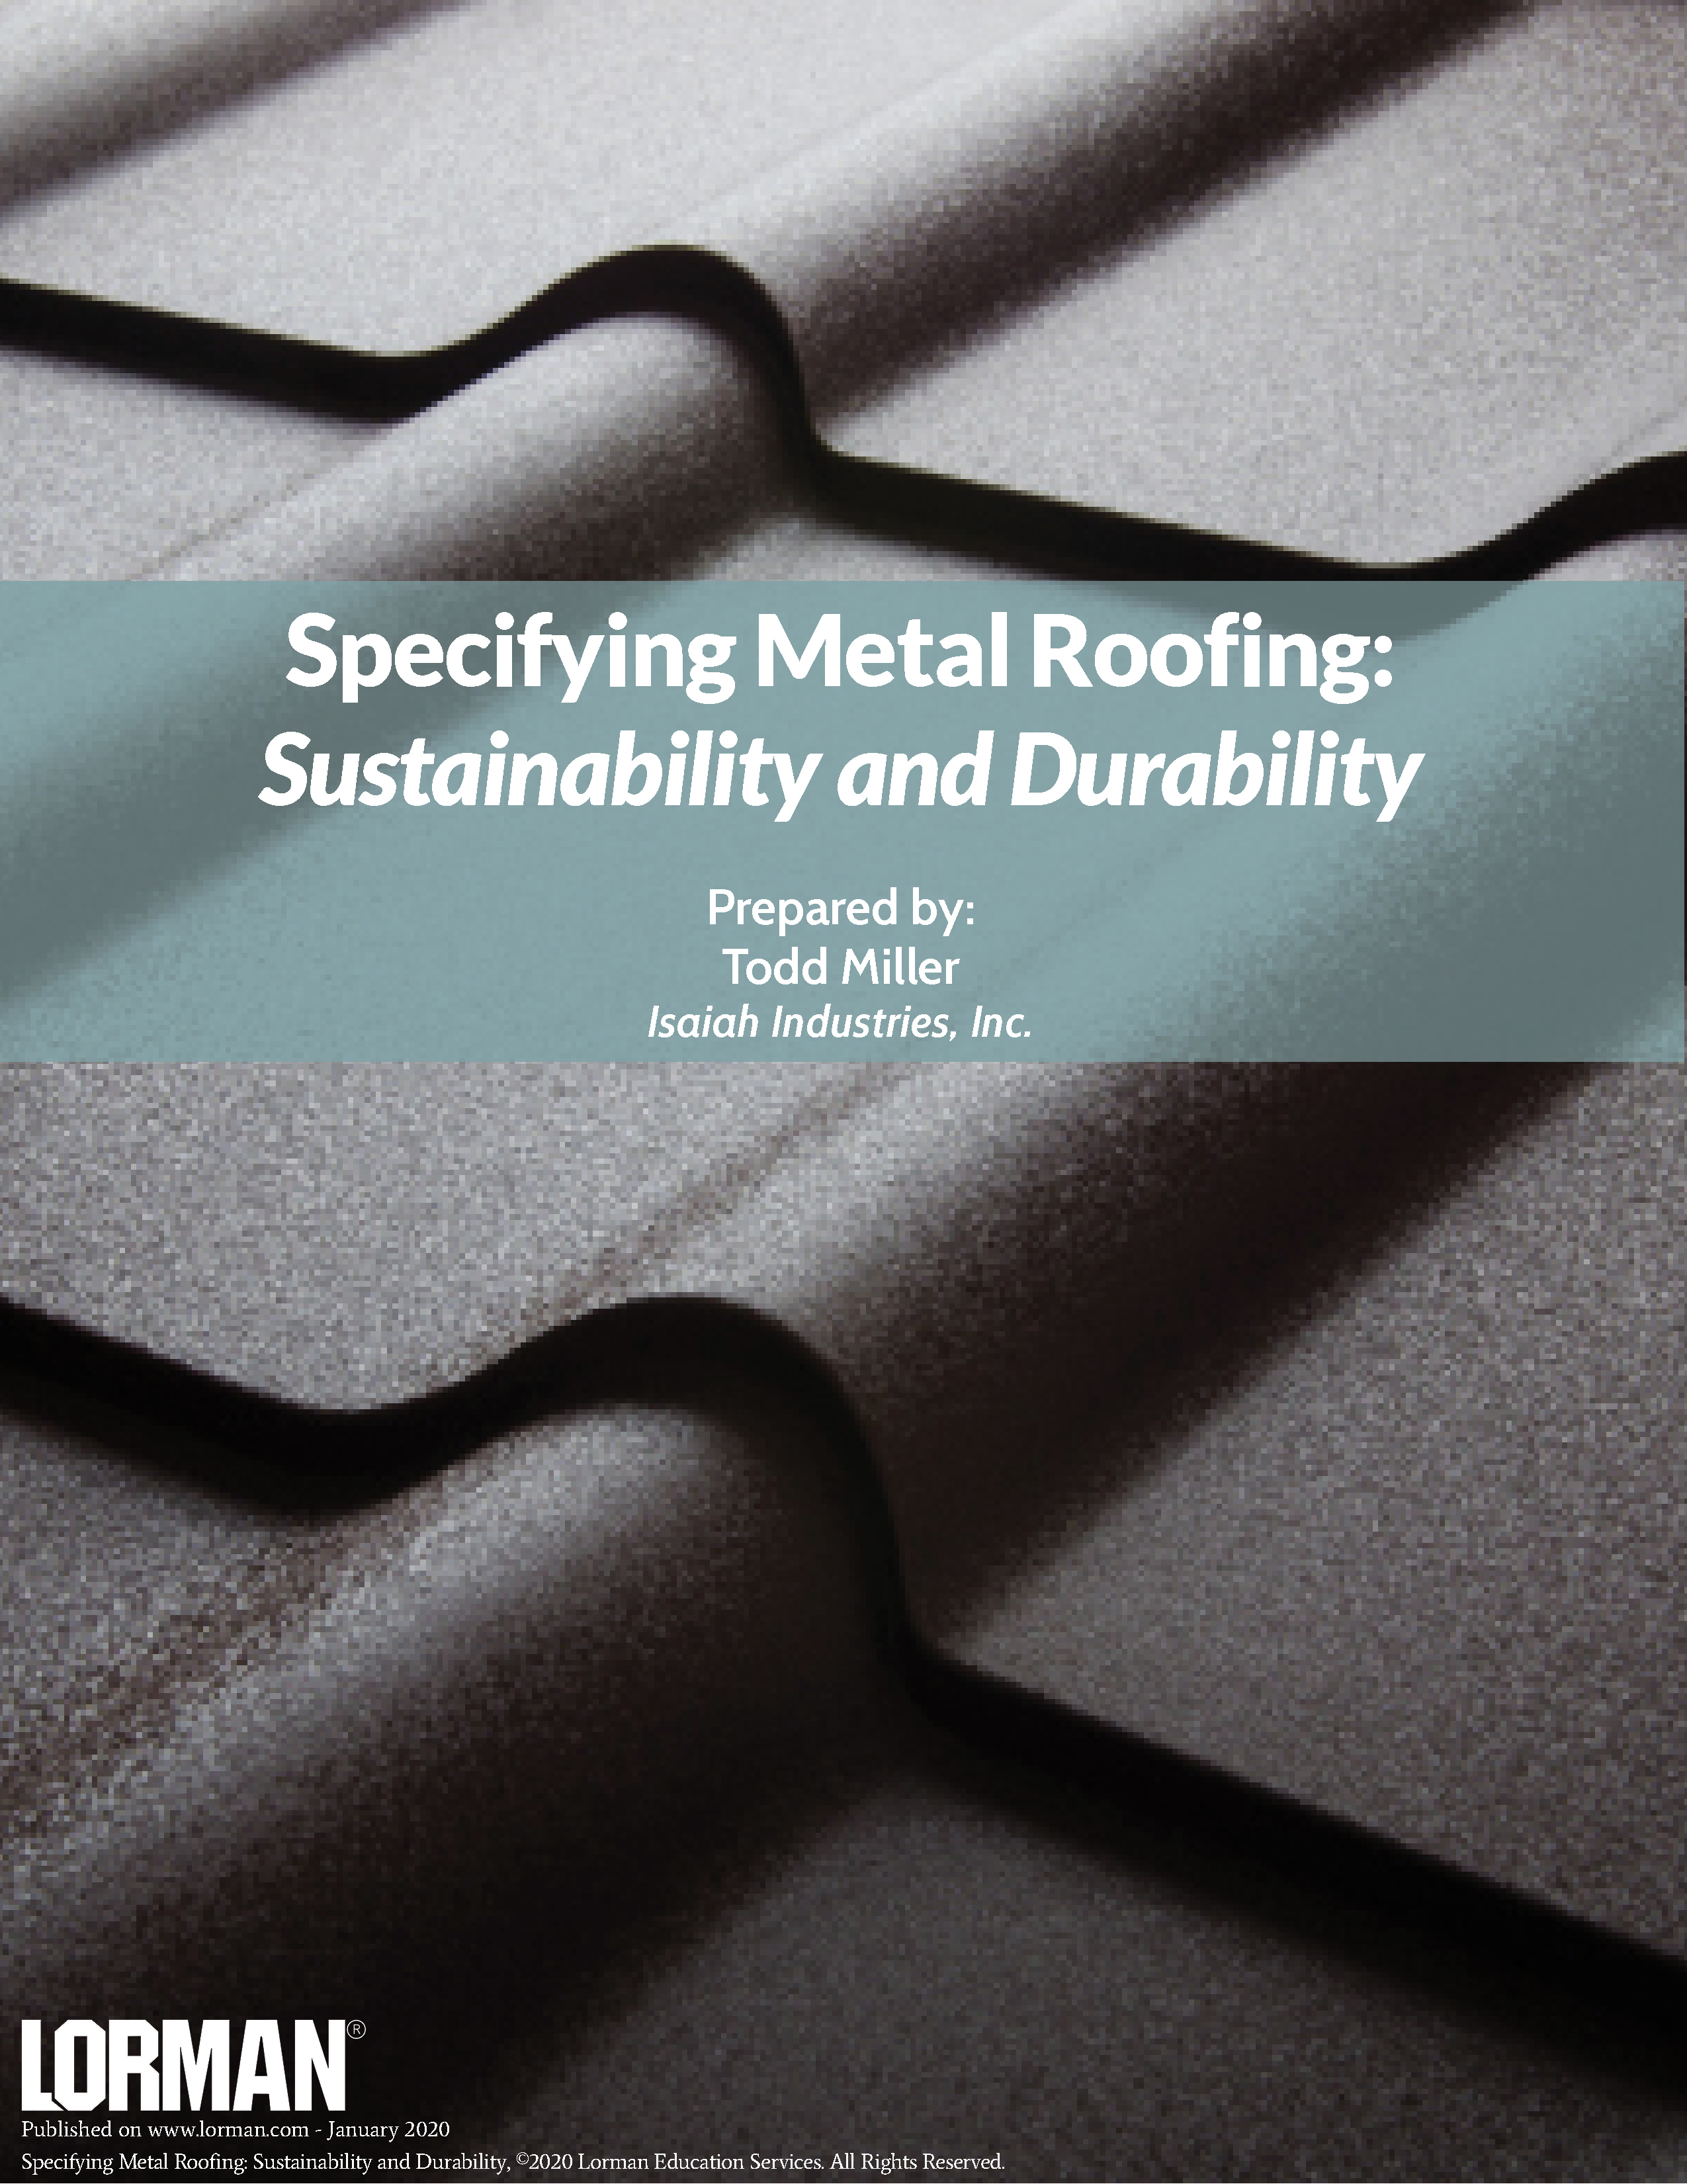 Specifying Metal Roofing: Sustainability and Durability